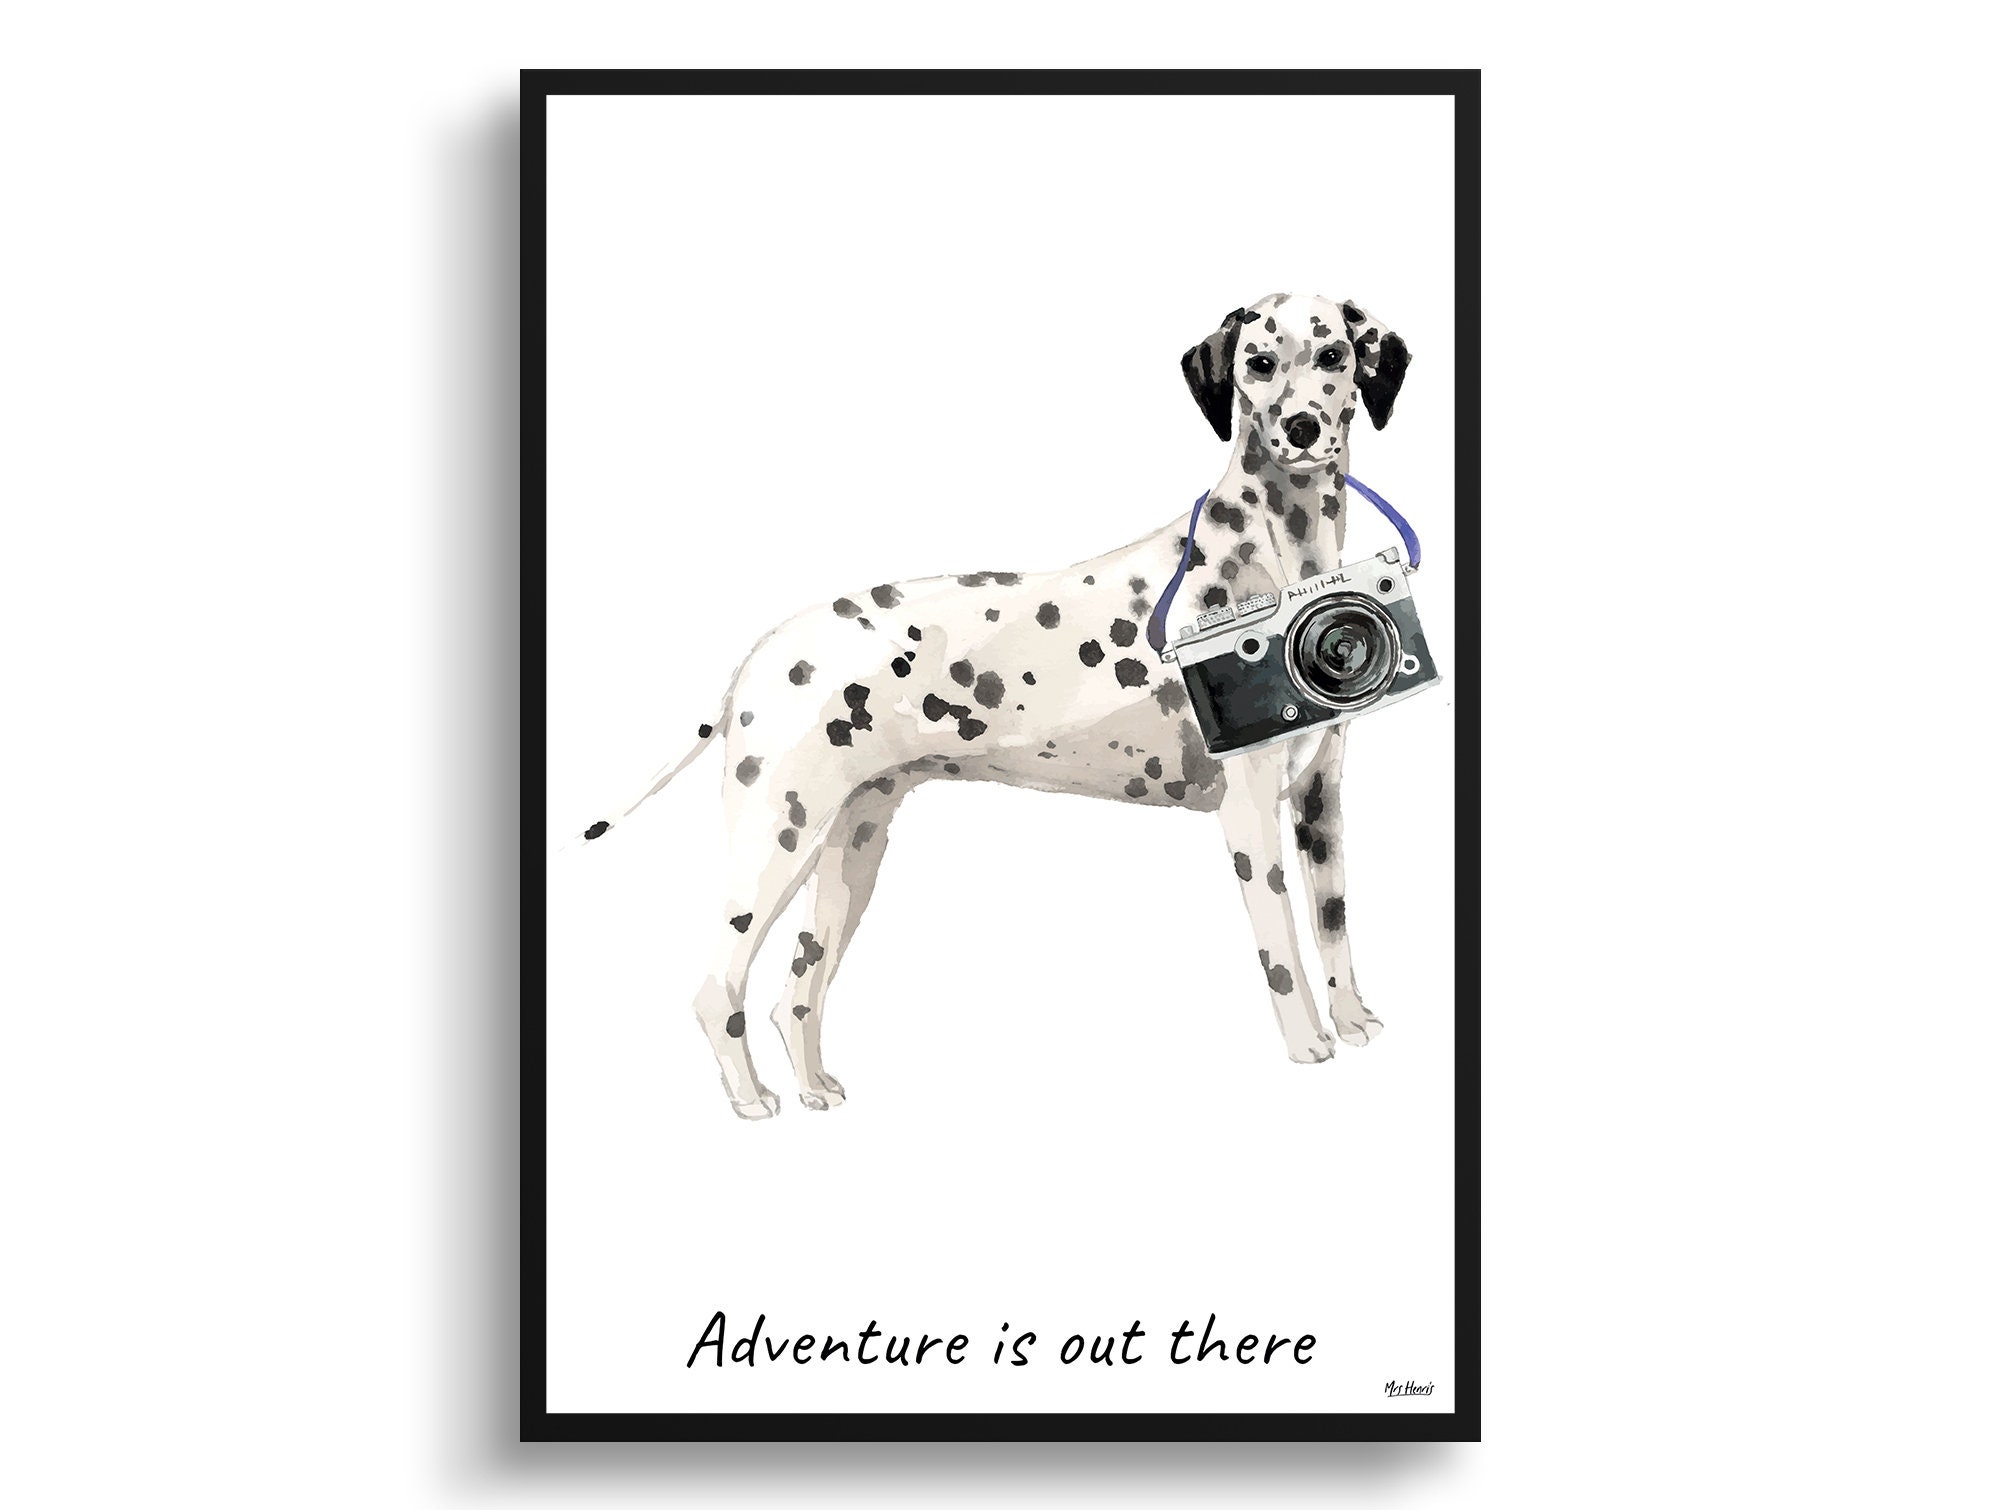 Adventure Is Out There Dalmatian Dog Print Illustration. Framed & Un-Framed Wall Art Options. Personalised Name